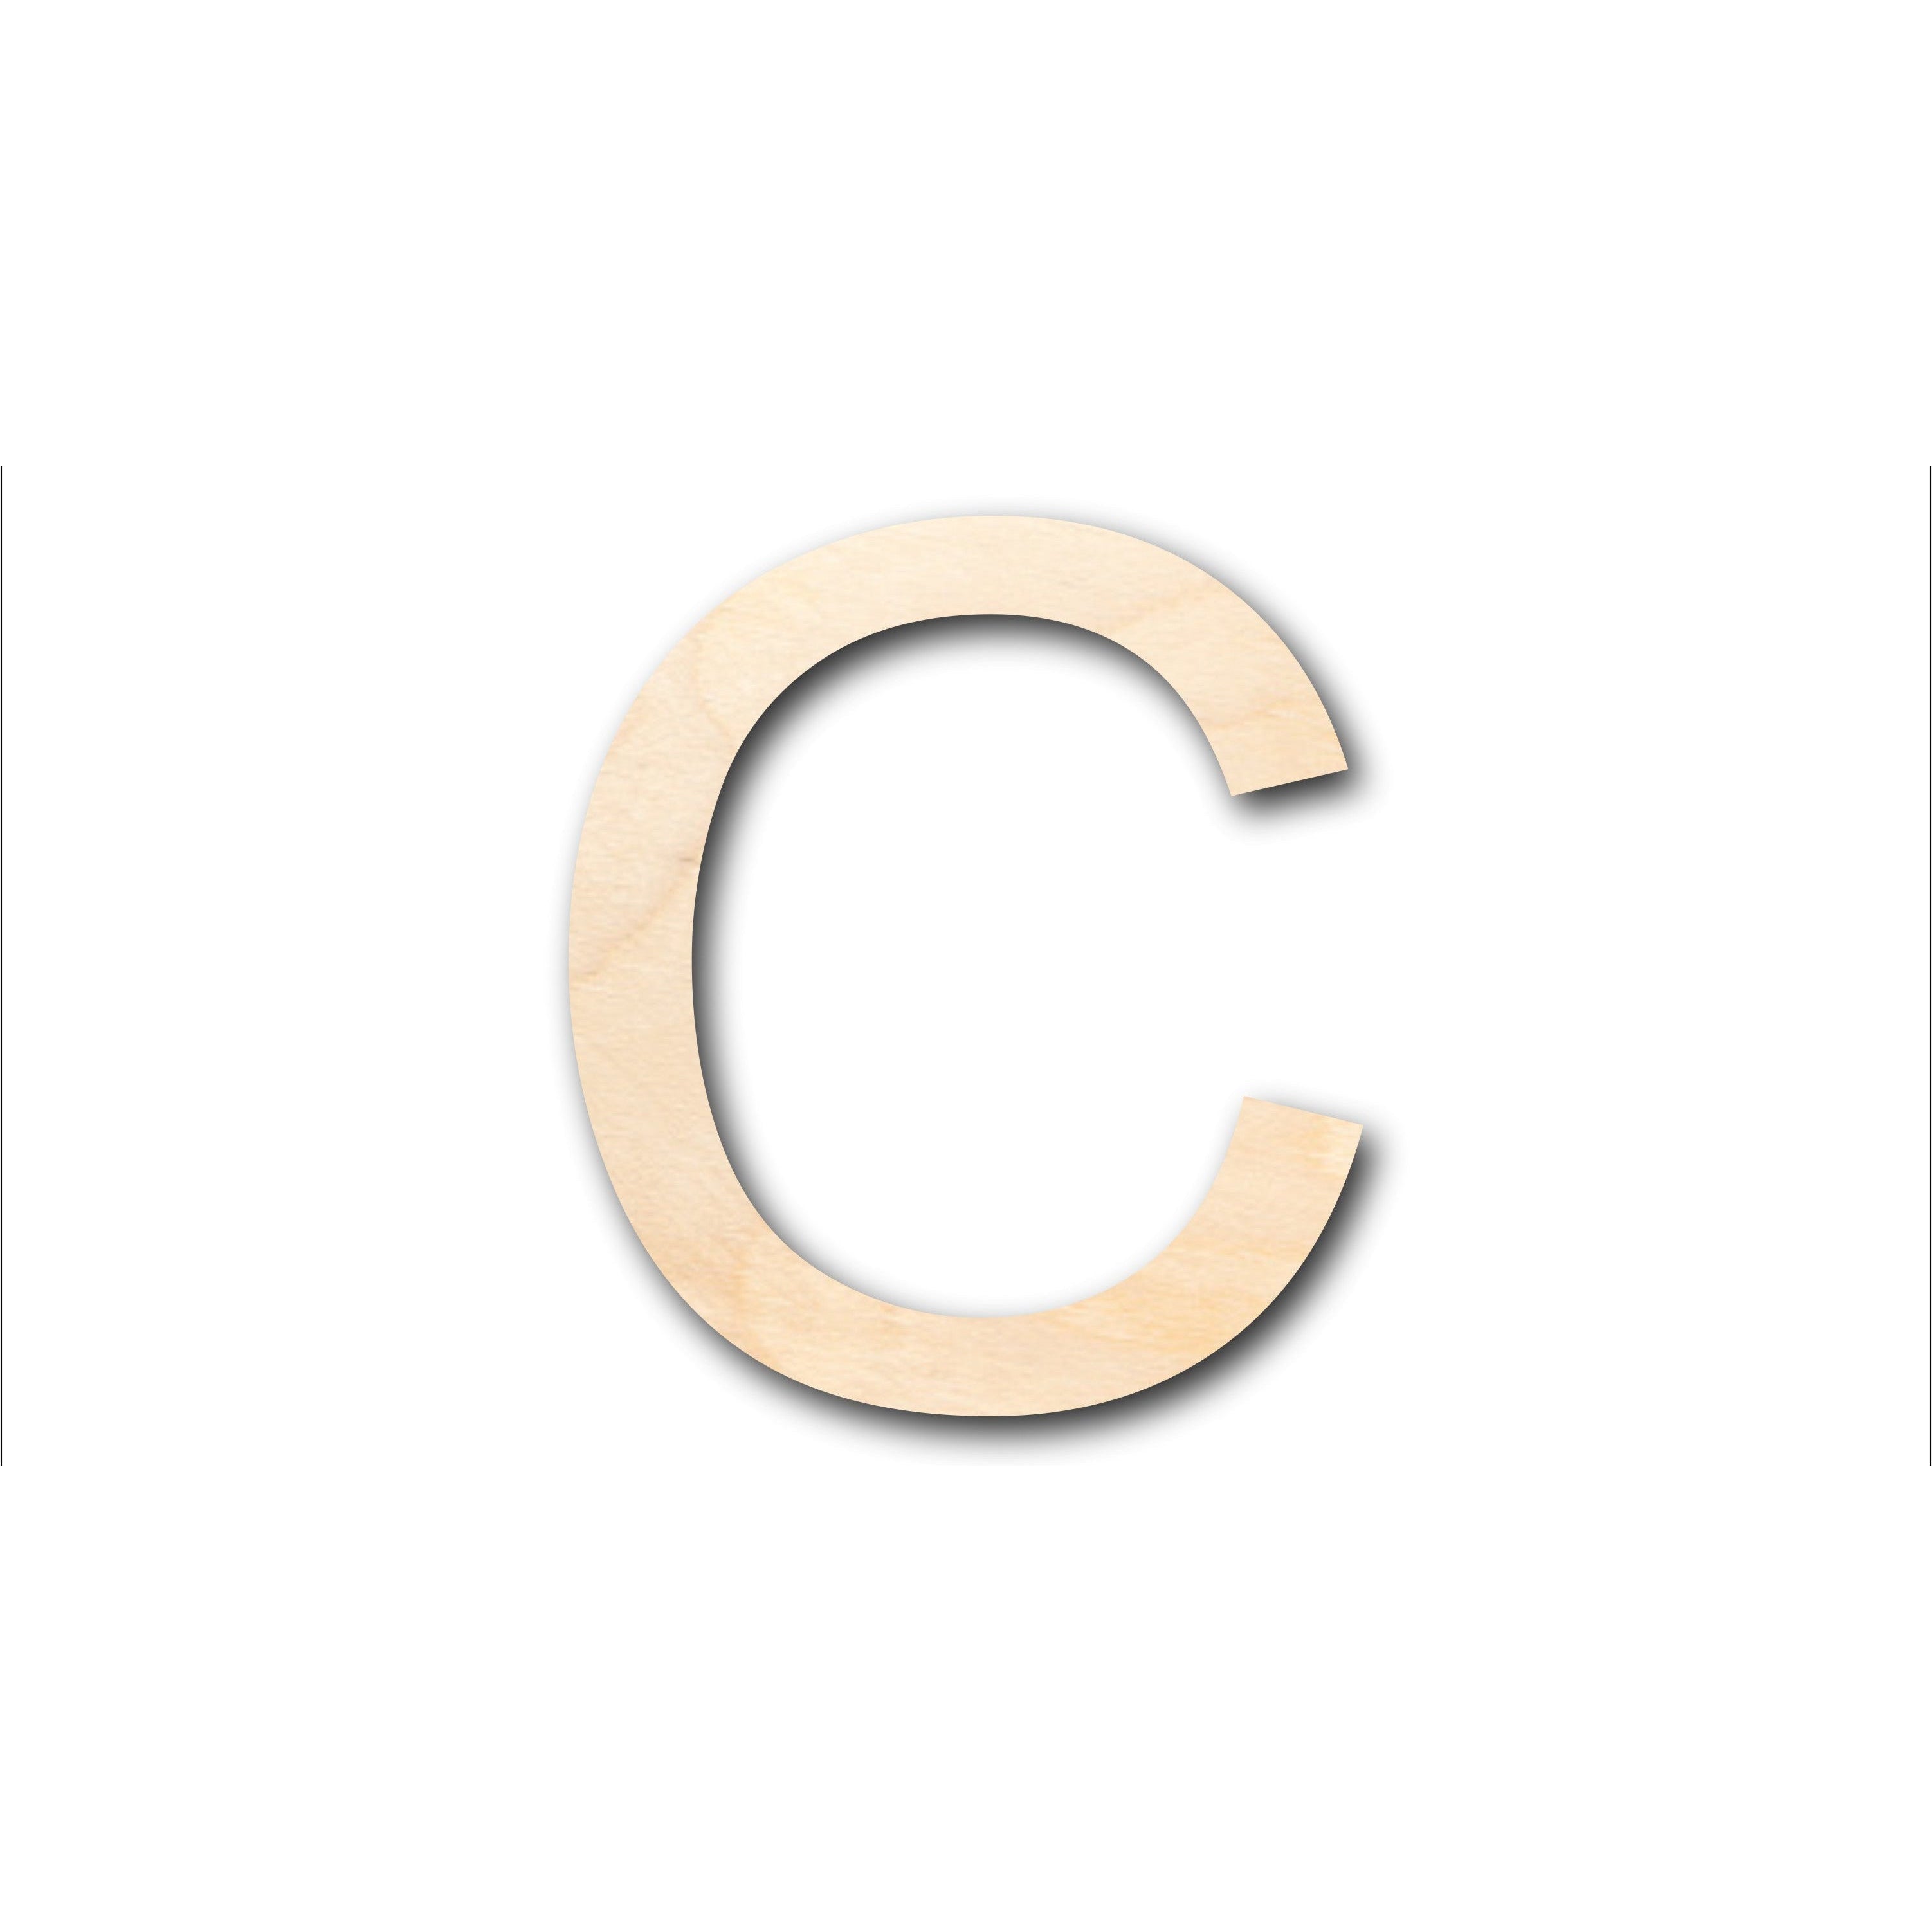 Unfinished Wood Arial Letter C Shape - Craft - up to 36